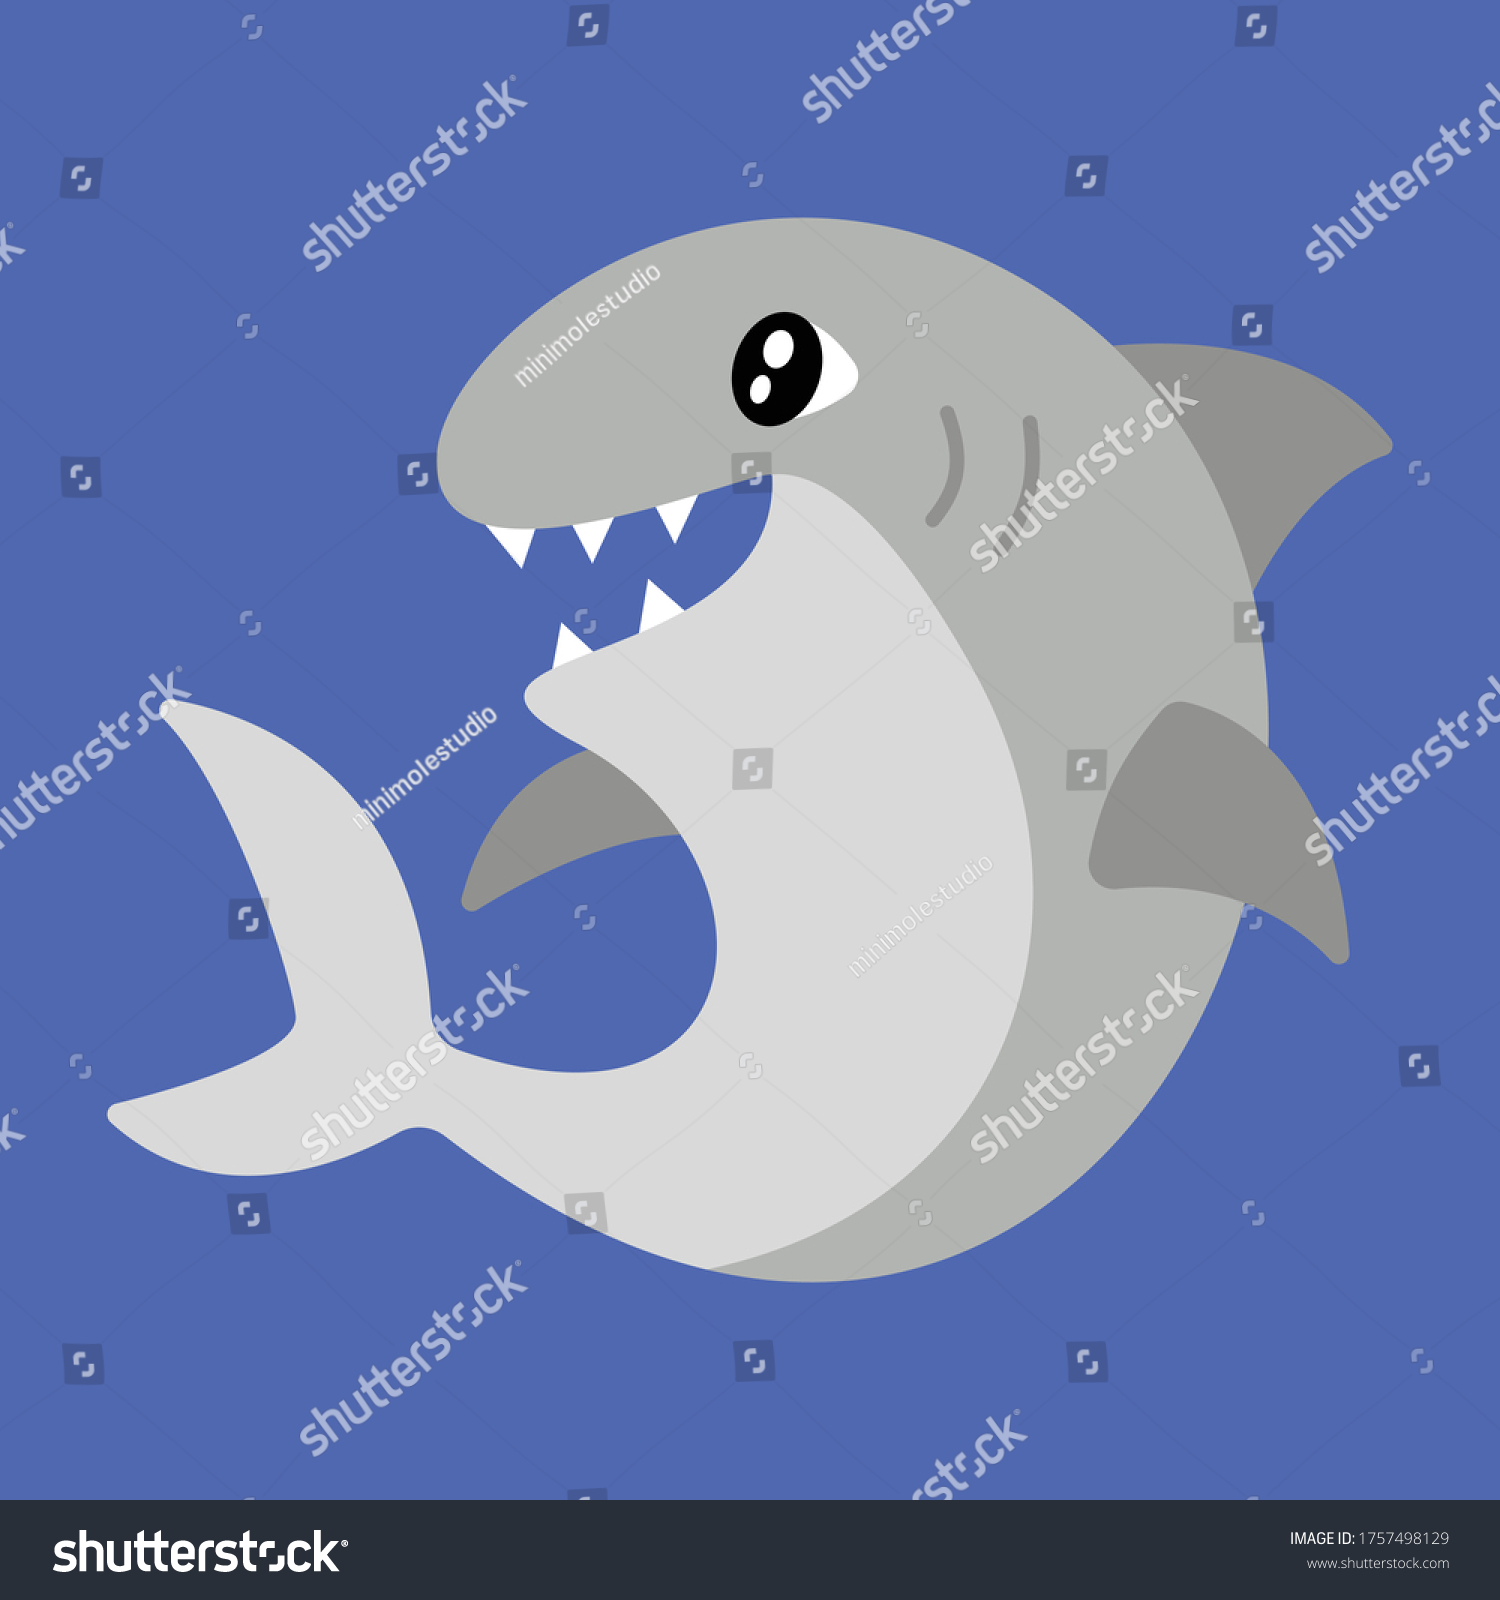 SVG of Vector illustration of a shark with a cute face. Simple, flat kawaii style. svg